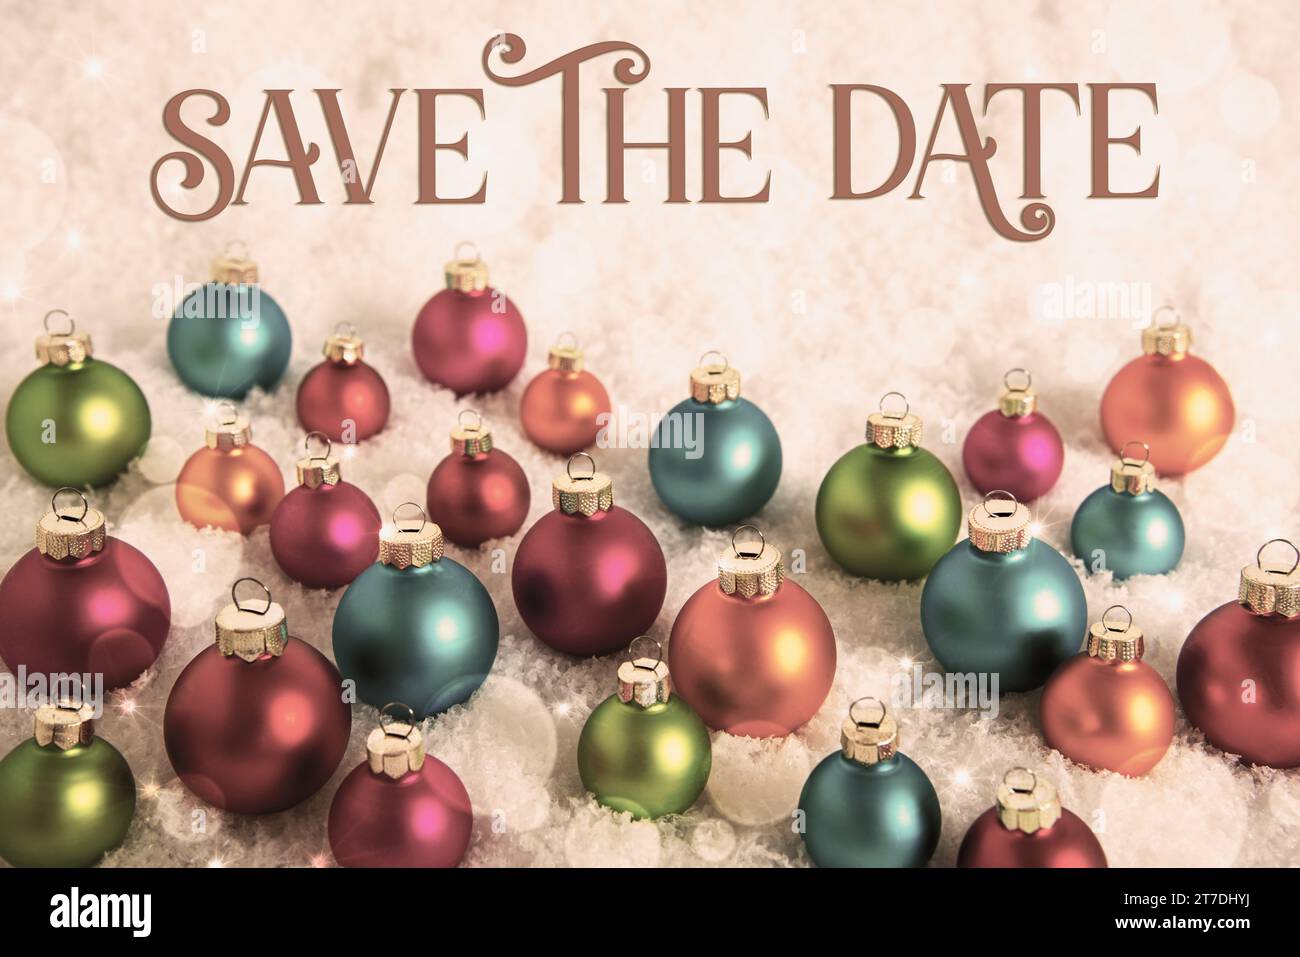 Text Save The Date, Many Colorful Christmas Balls Symbolizing Diversity, In The Snow, Vintage Style Stock Photo